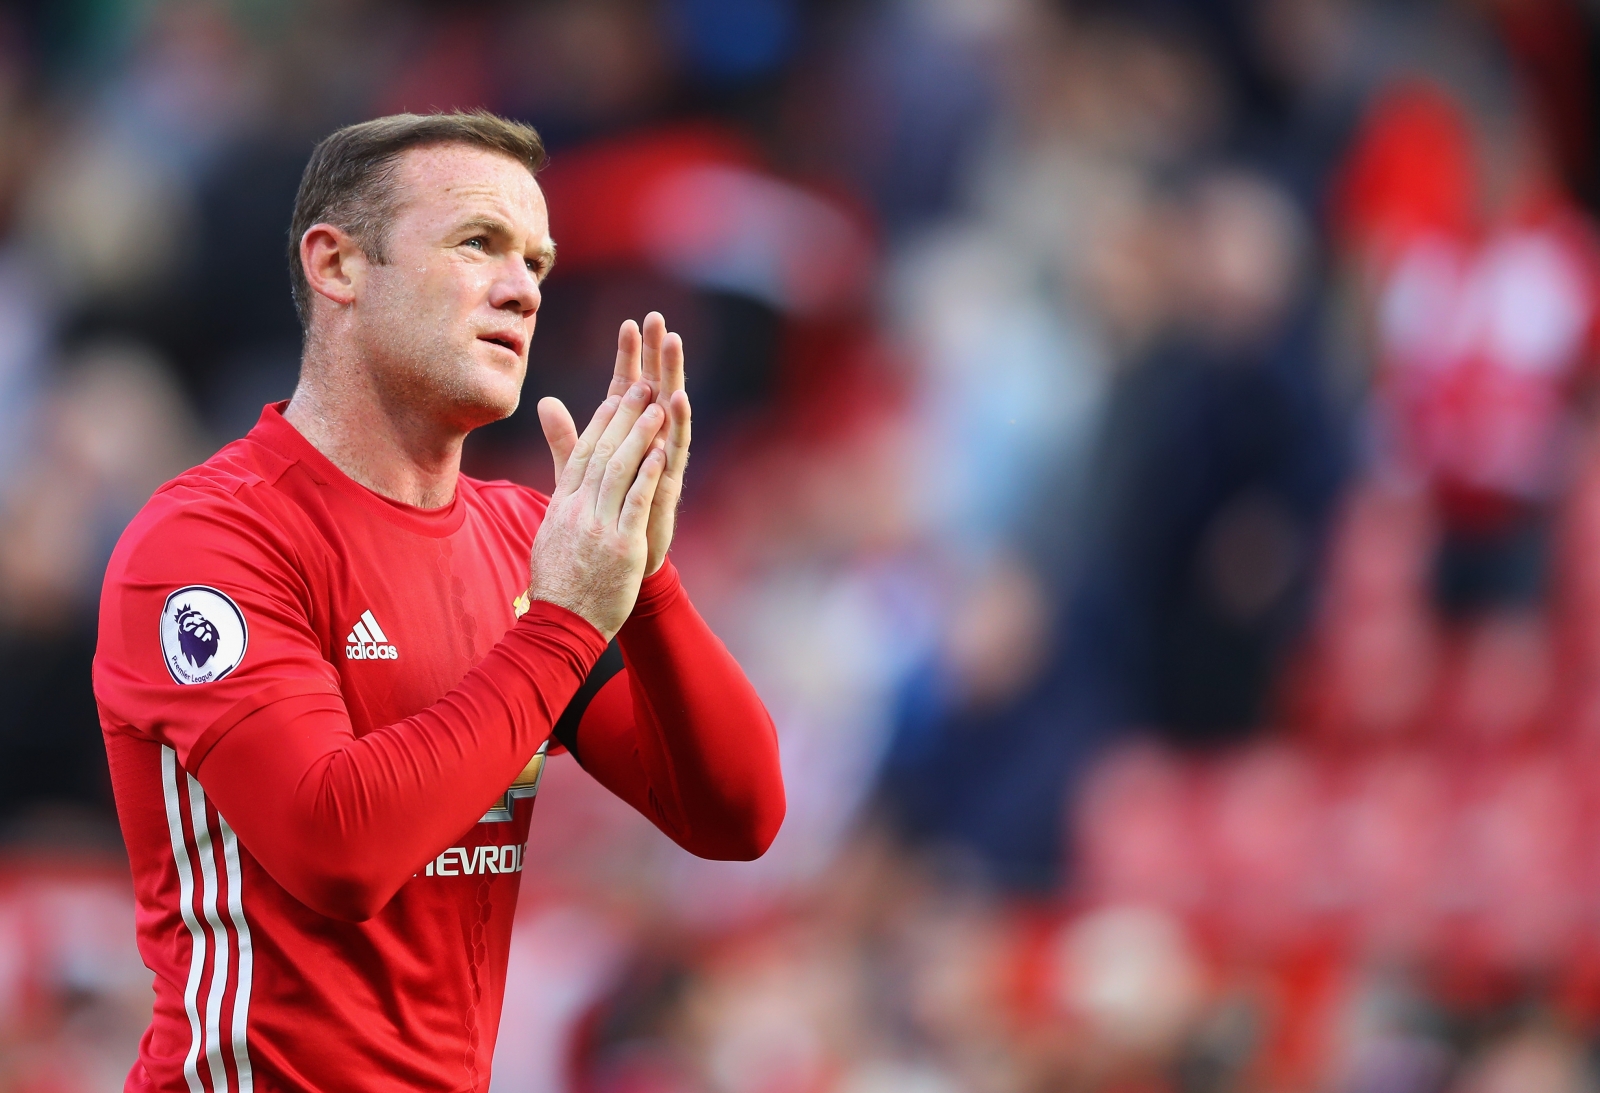 Manchester United forward Wayne Rooney 'confused' by Jose Mourinho's demands